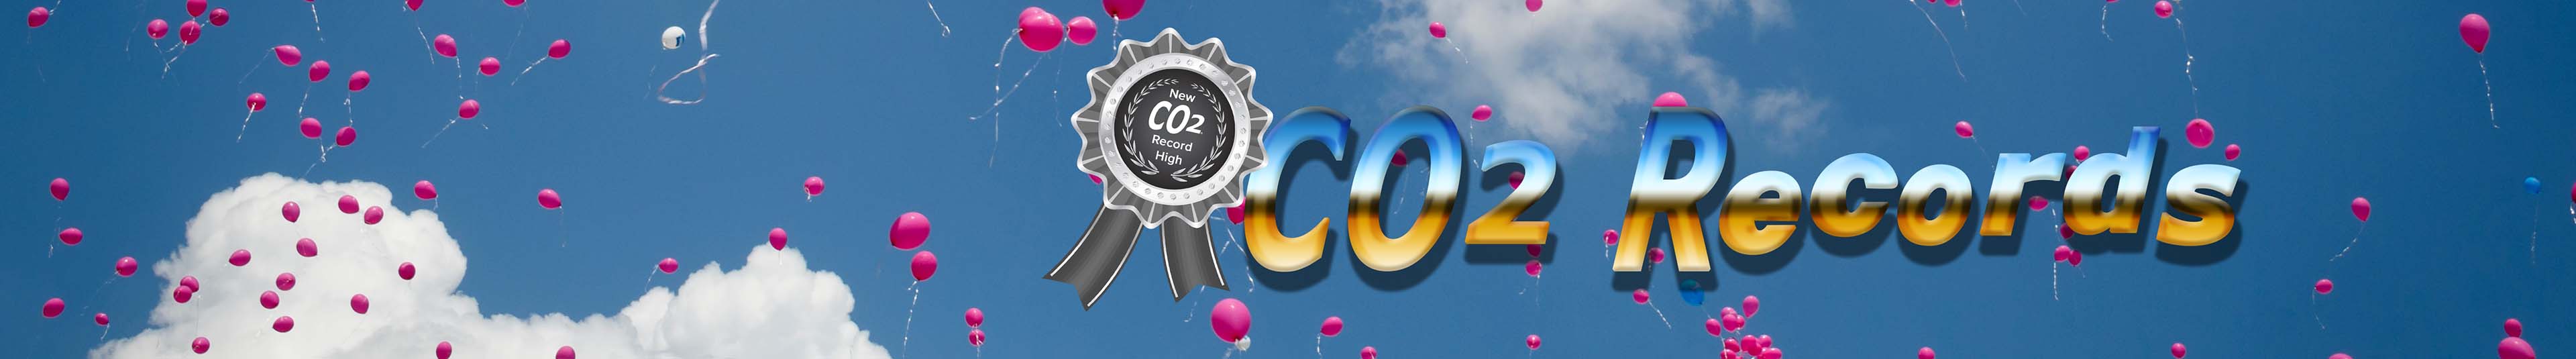 co2 земля co2 records banner